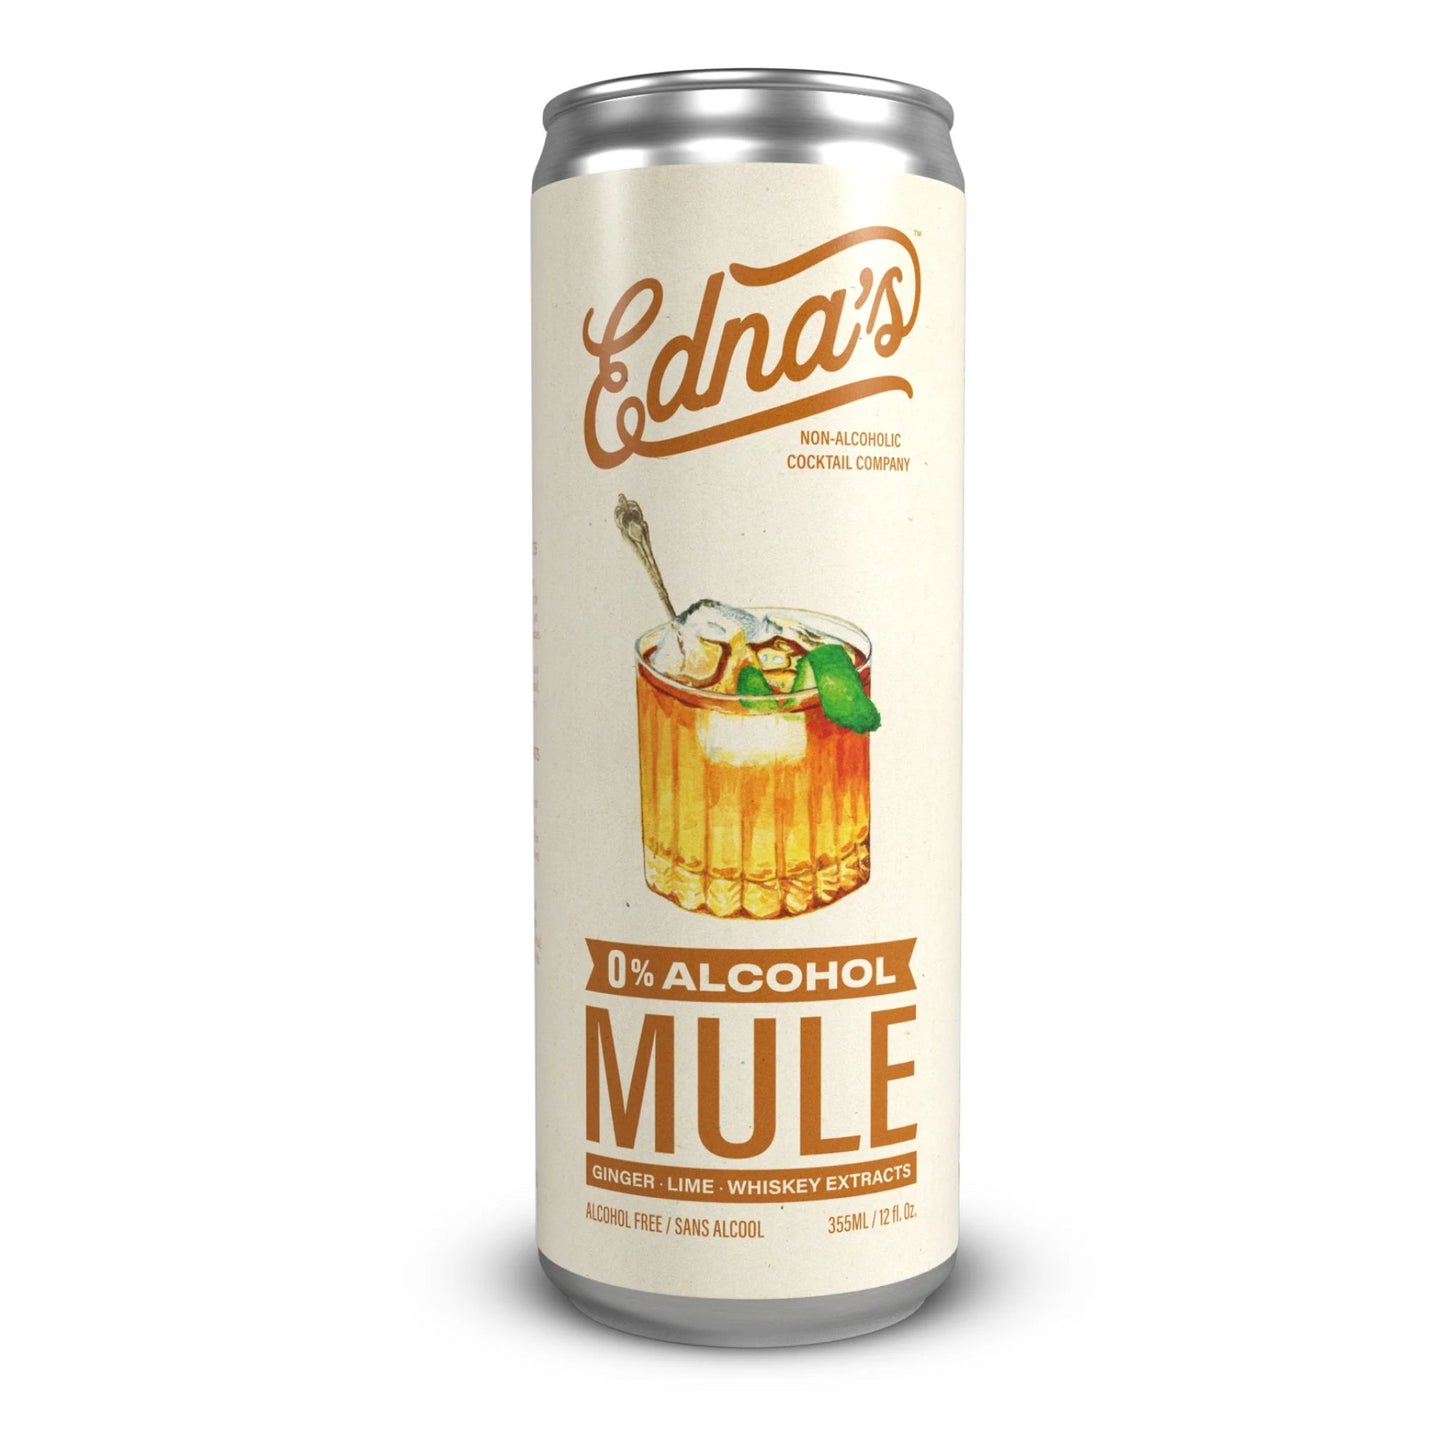 Edna's Mule Non-Alcoholic Cocktails is available at Knyota Non-Alcoholic Drinks.